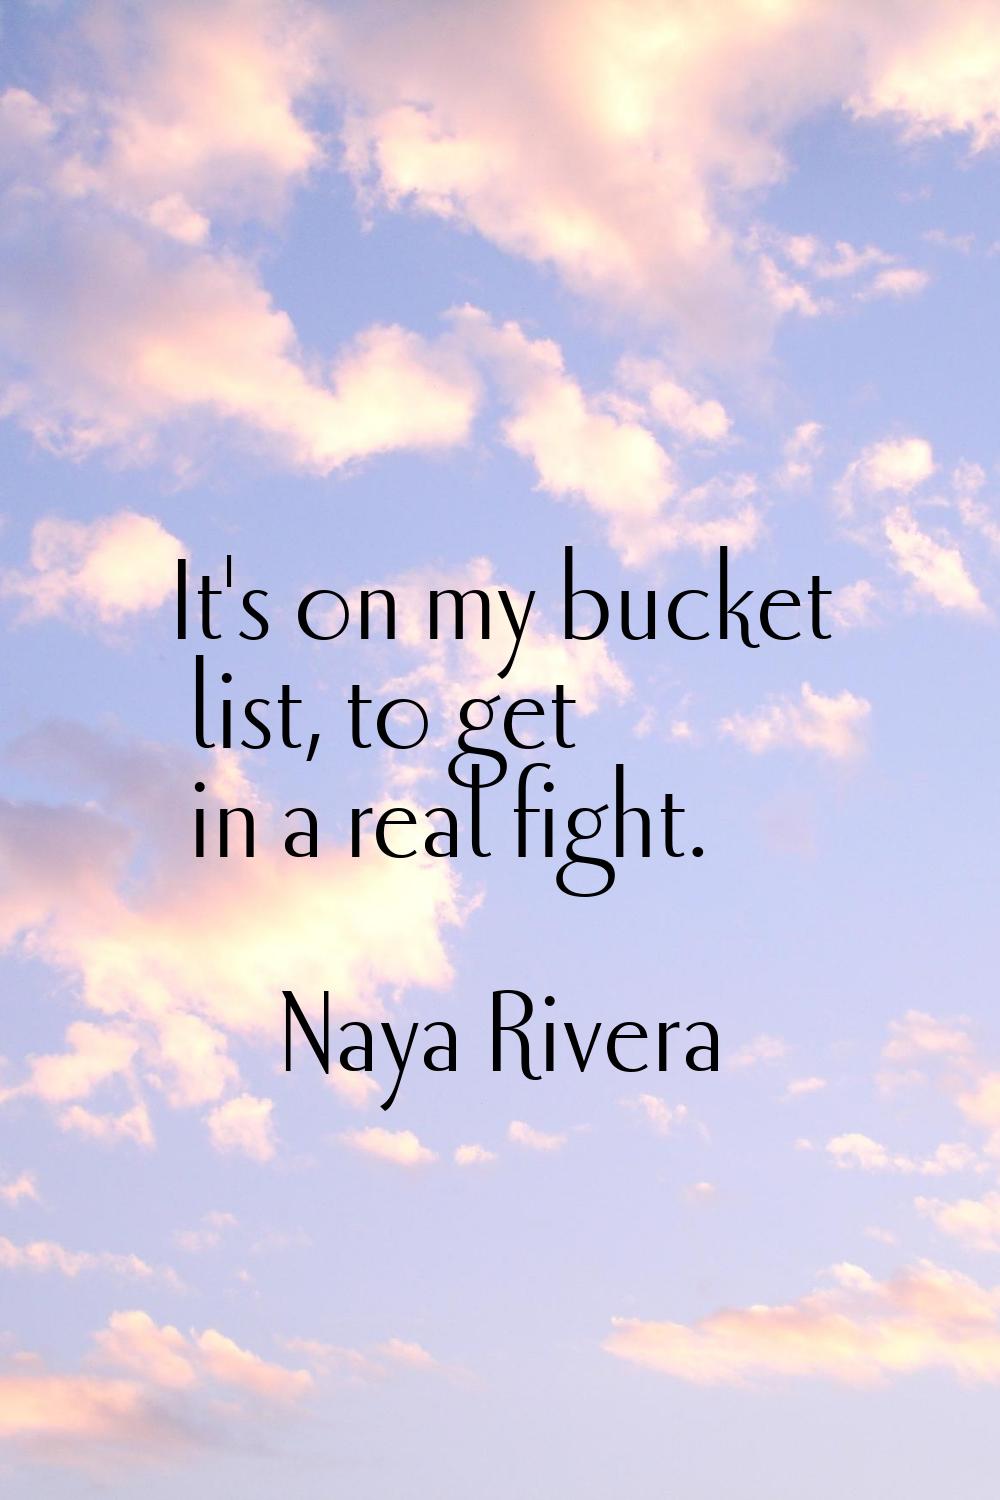 It's on my bucket list, to get in a real fight.